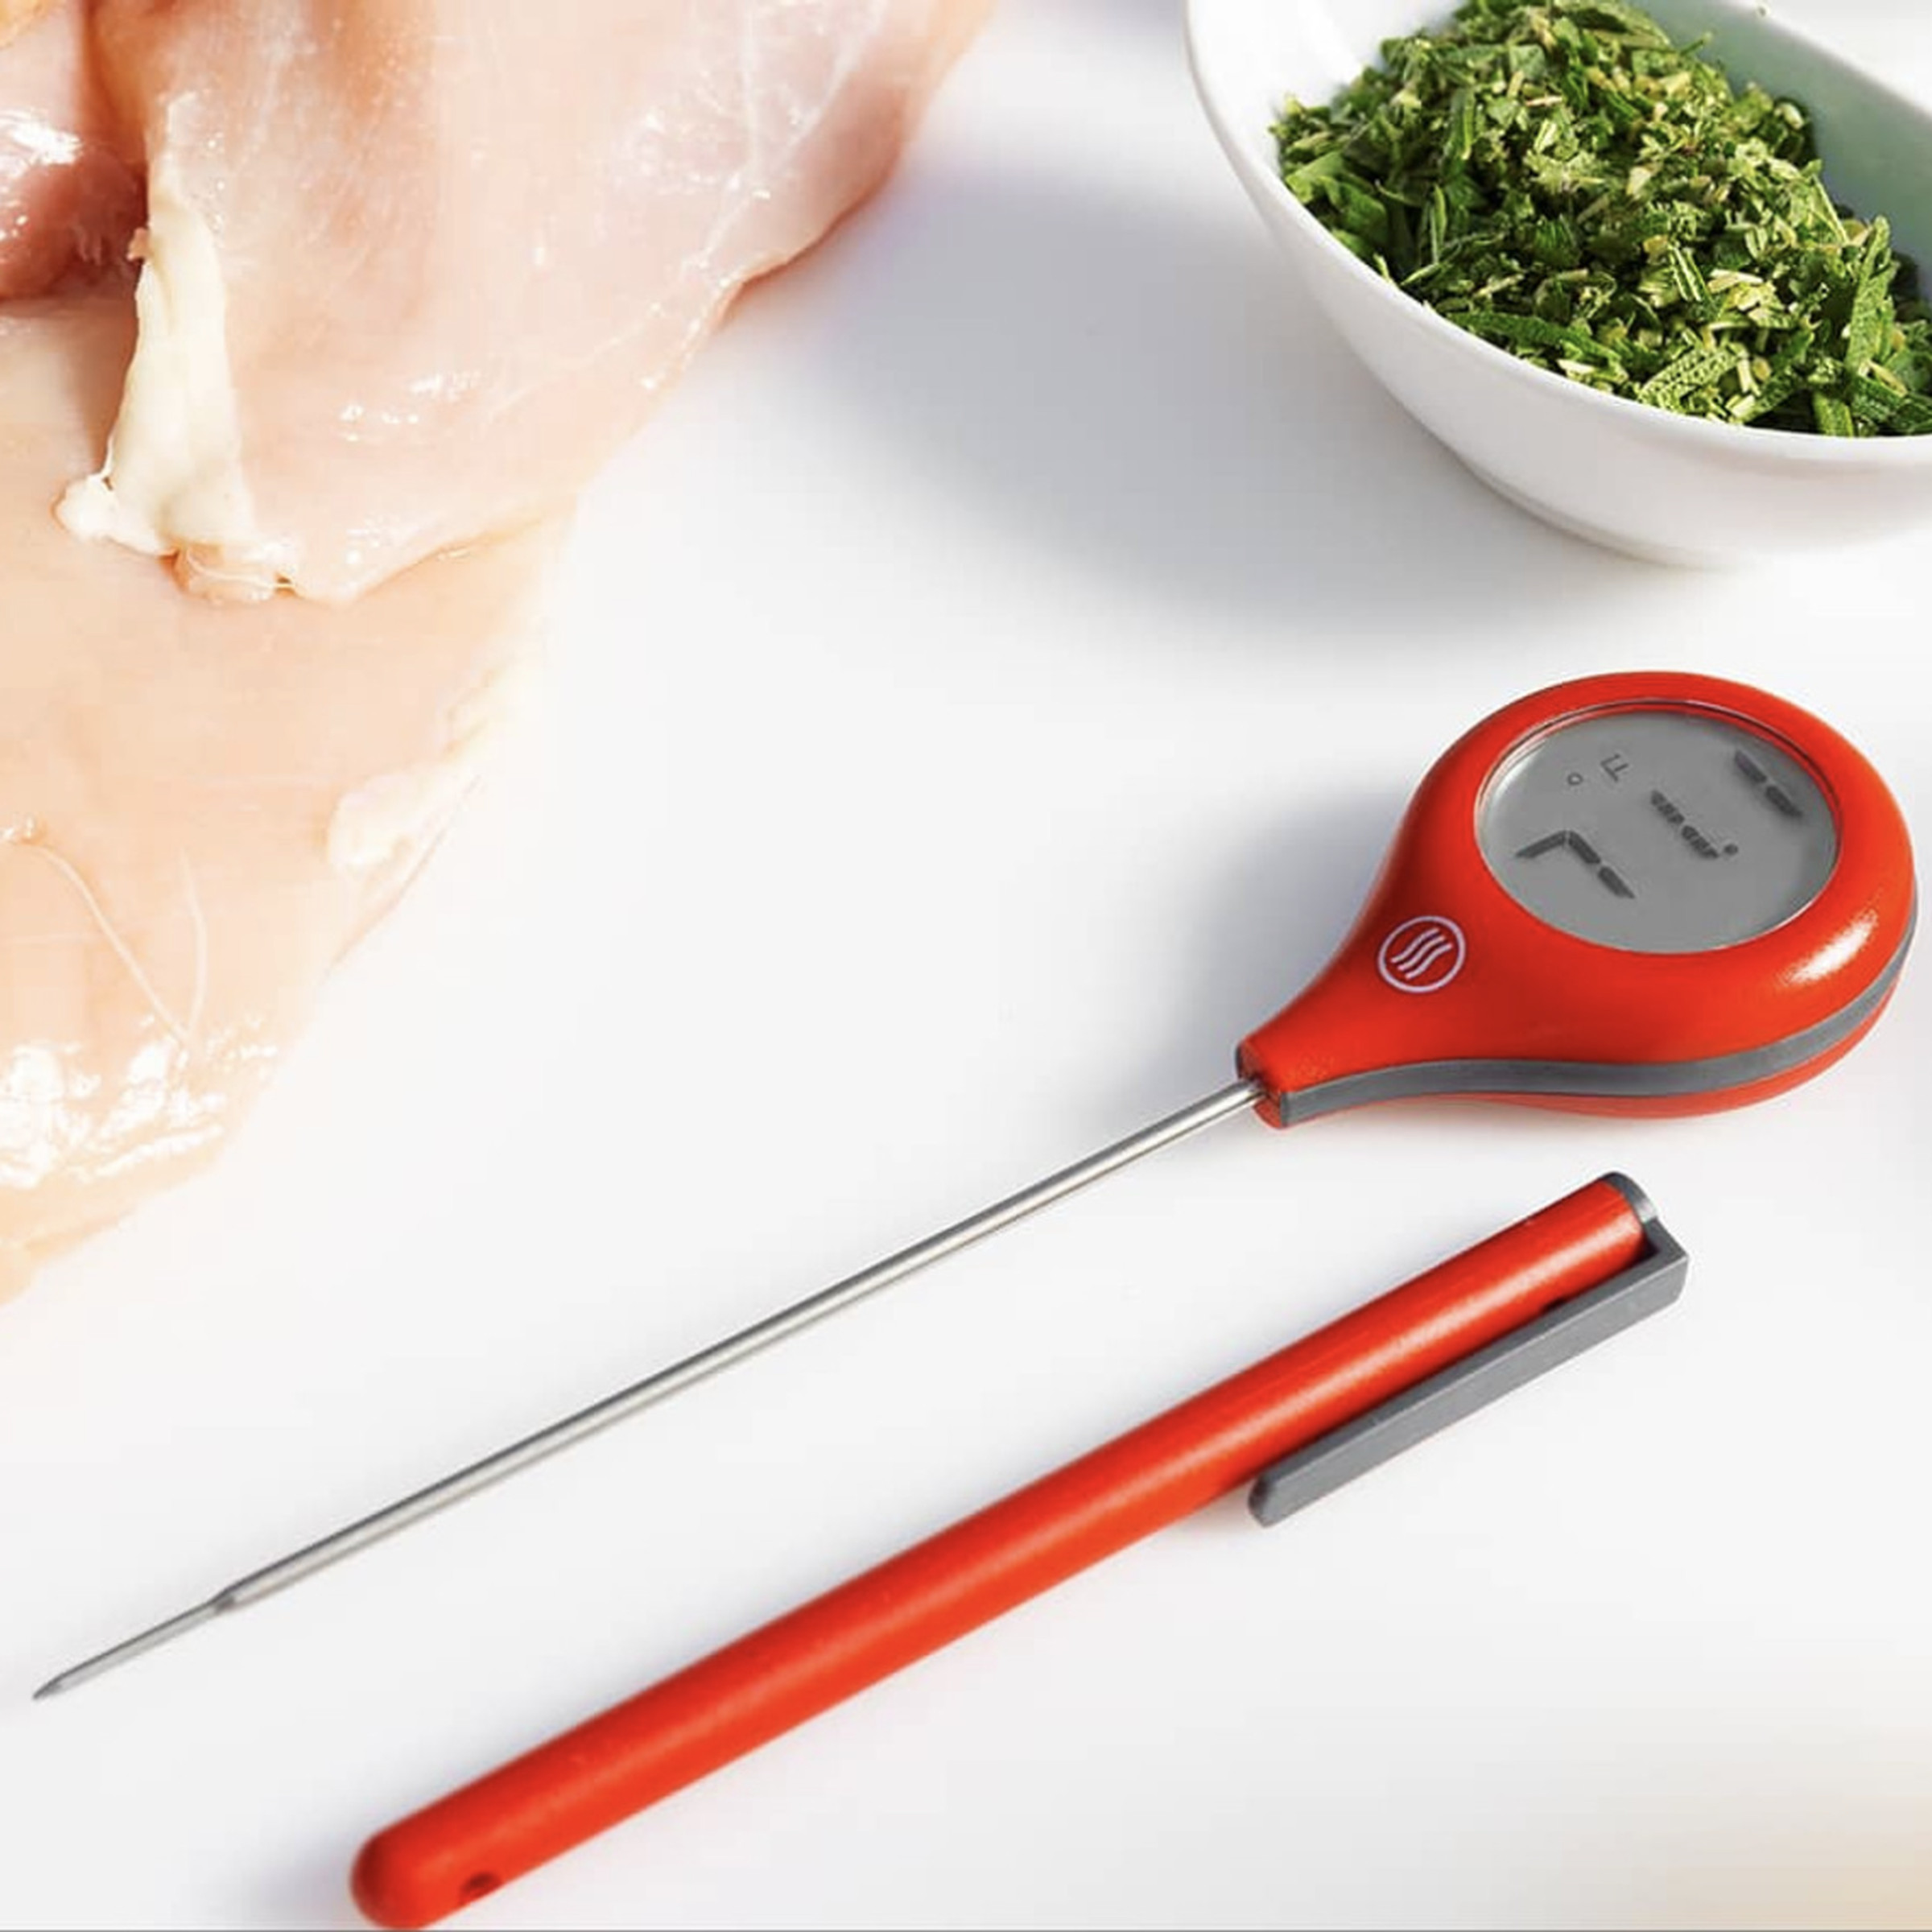 Digital thermometer and cover on table top.